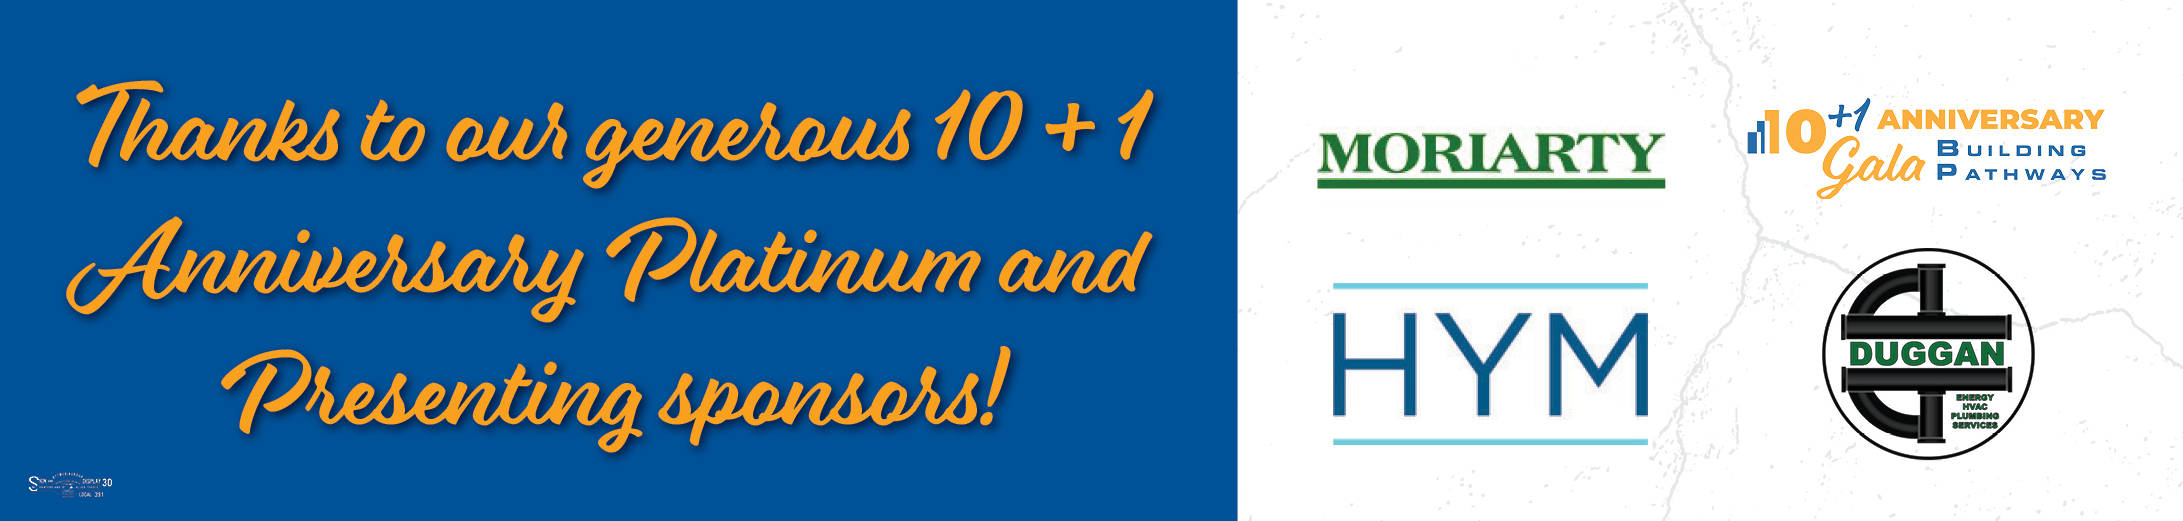 Thank you to our generation 10 + 1 Anniversary Platinum and Presenting sponsors: Moriarty, HYM, Duggan